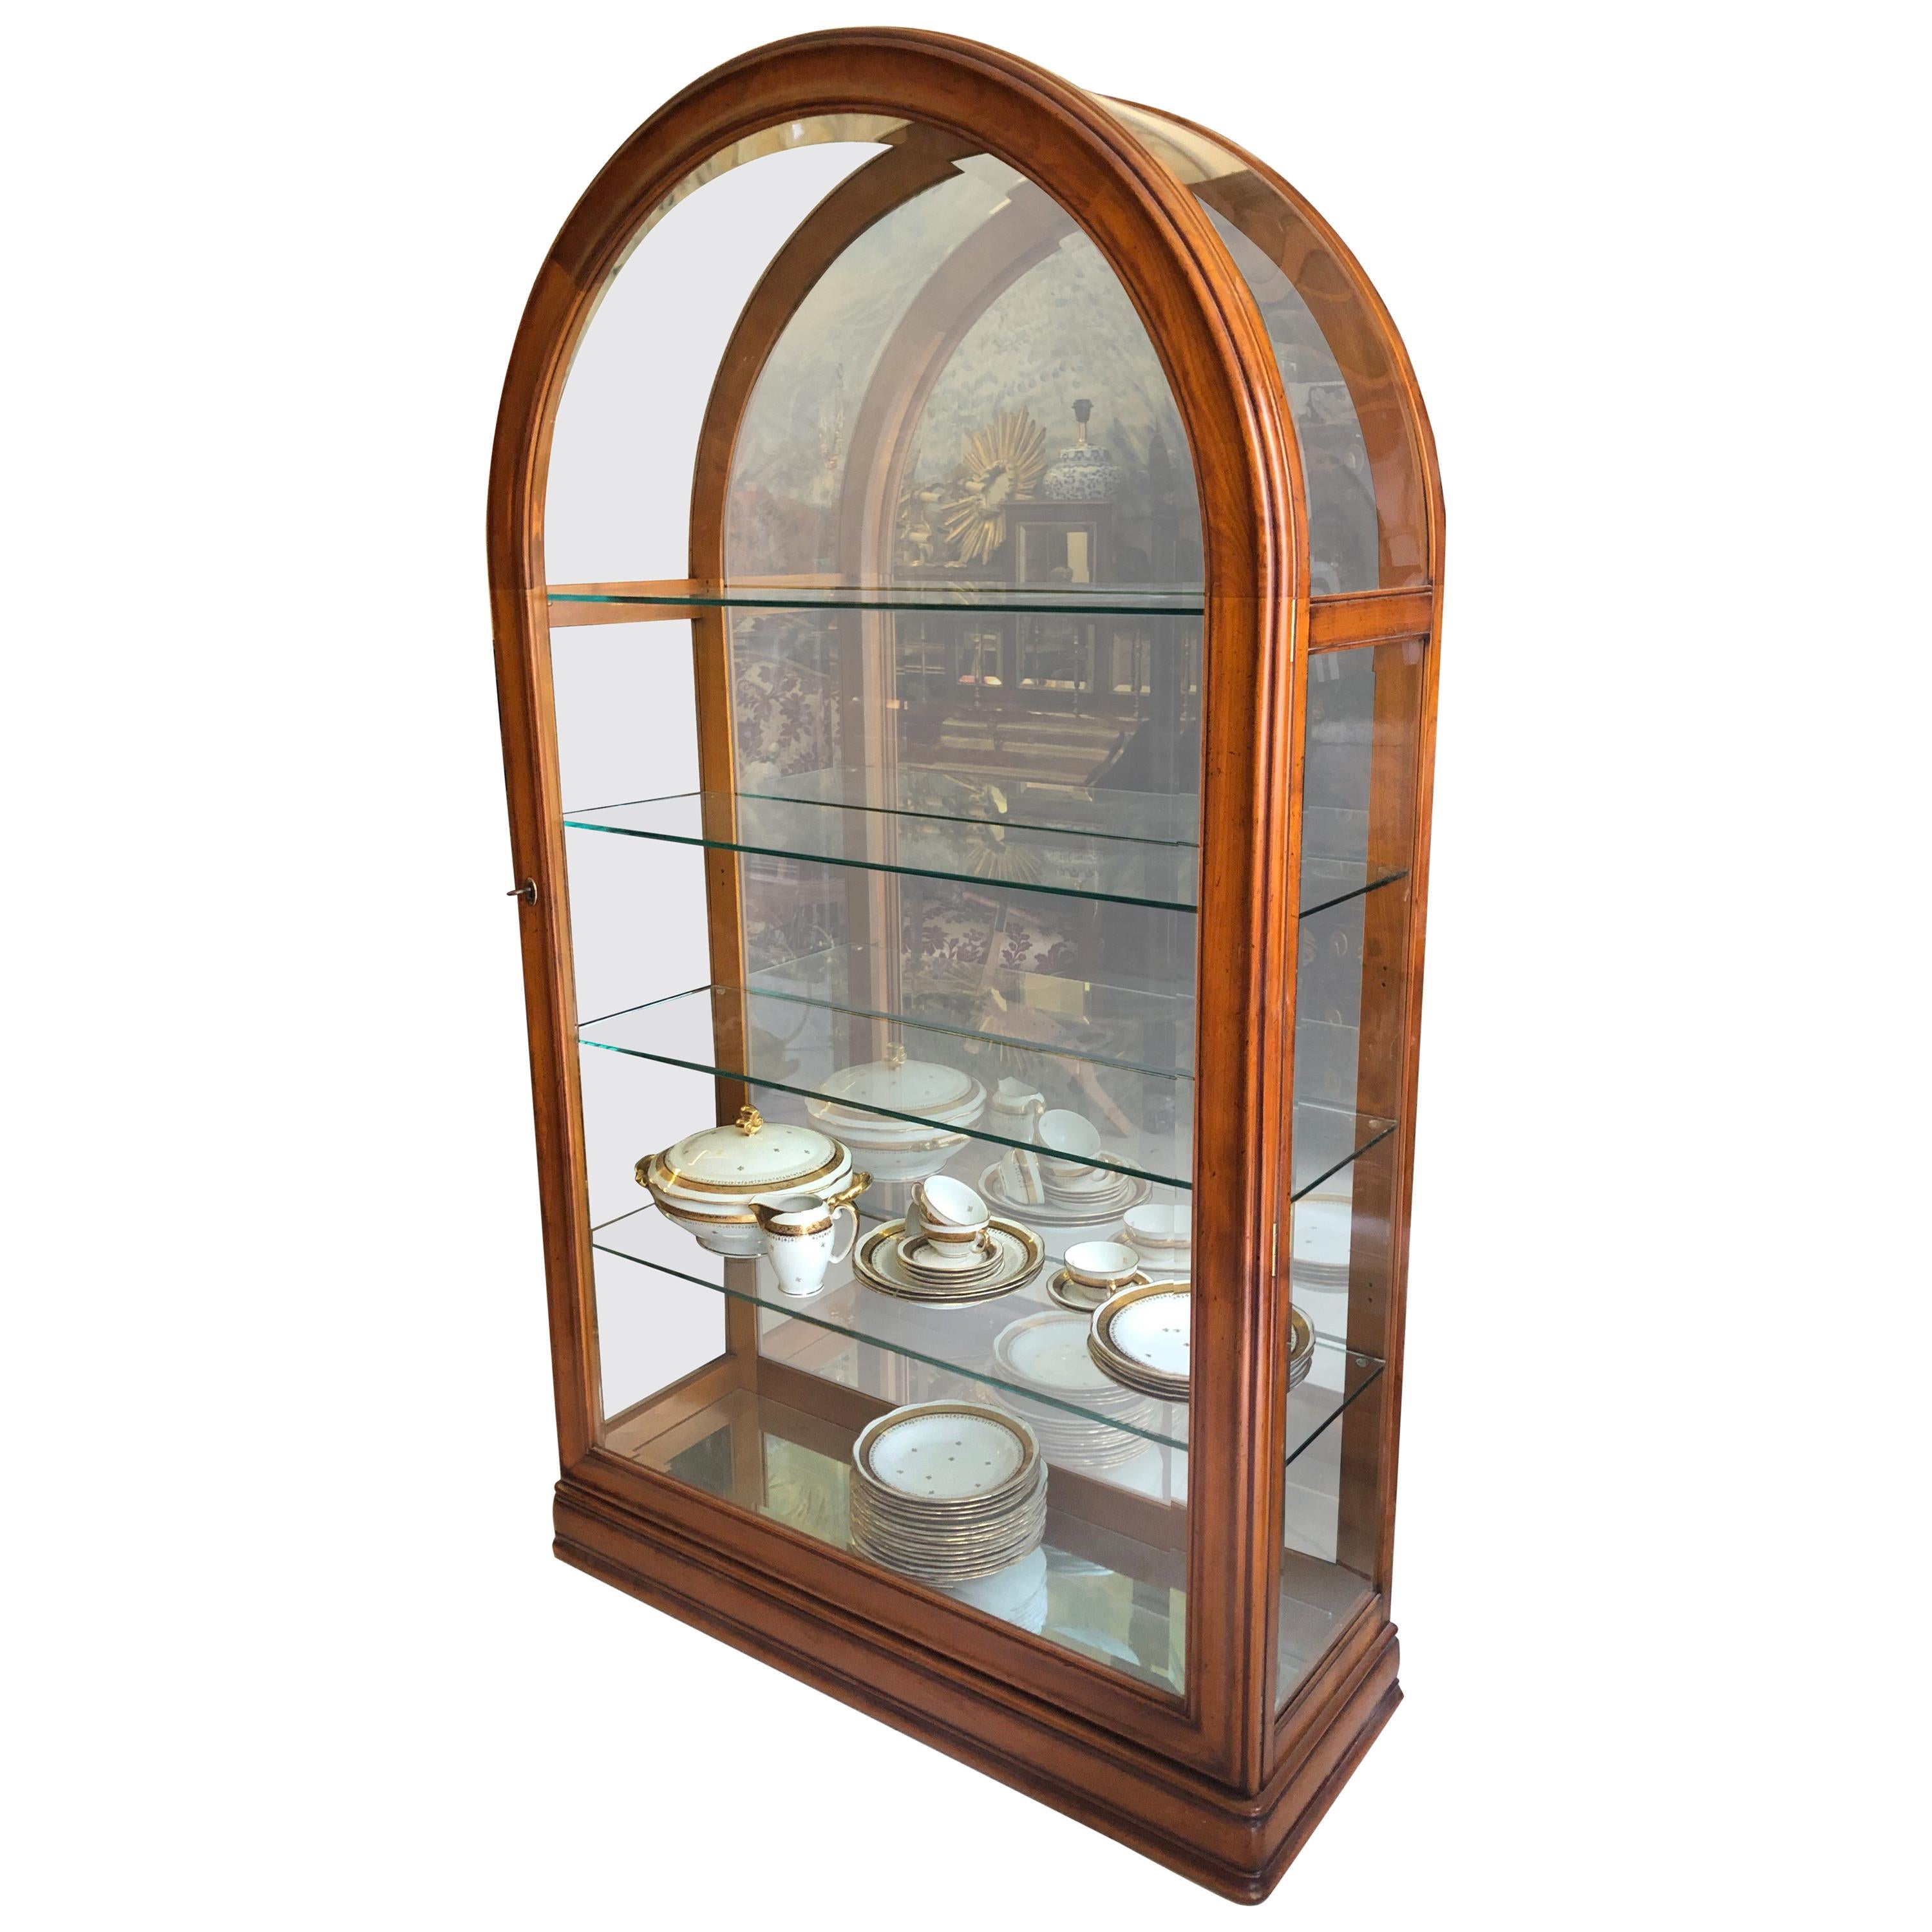 20th Century Grand Demilune Mahogany Display Cabinet or Vitrine with Mirror Back